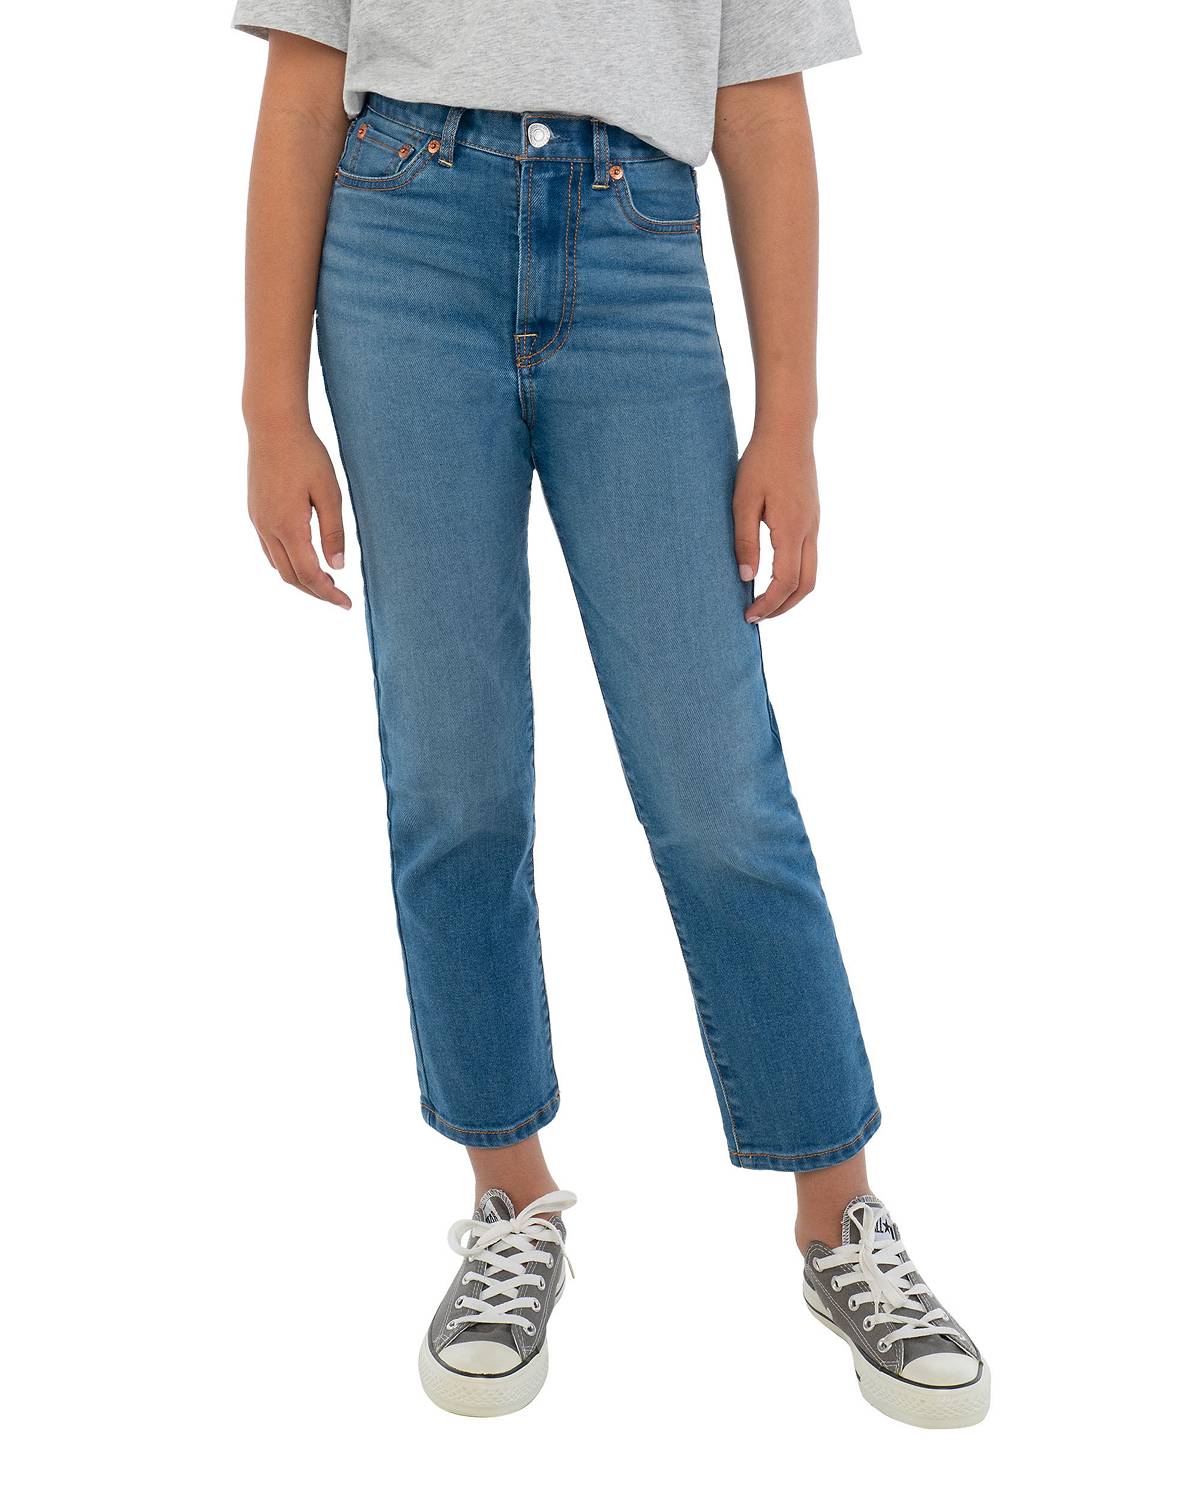 Girl wearing Ribcage Straight Fit Jeans